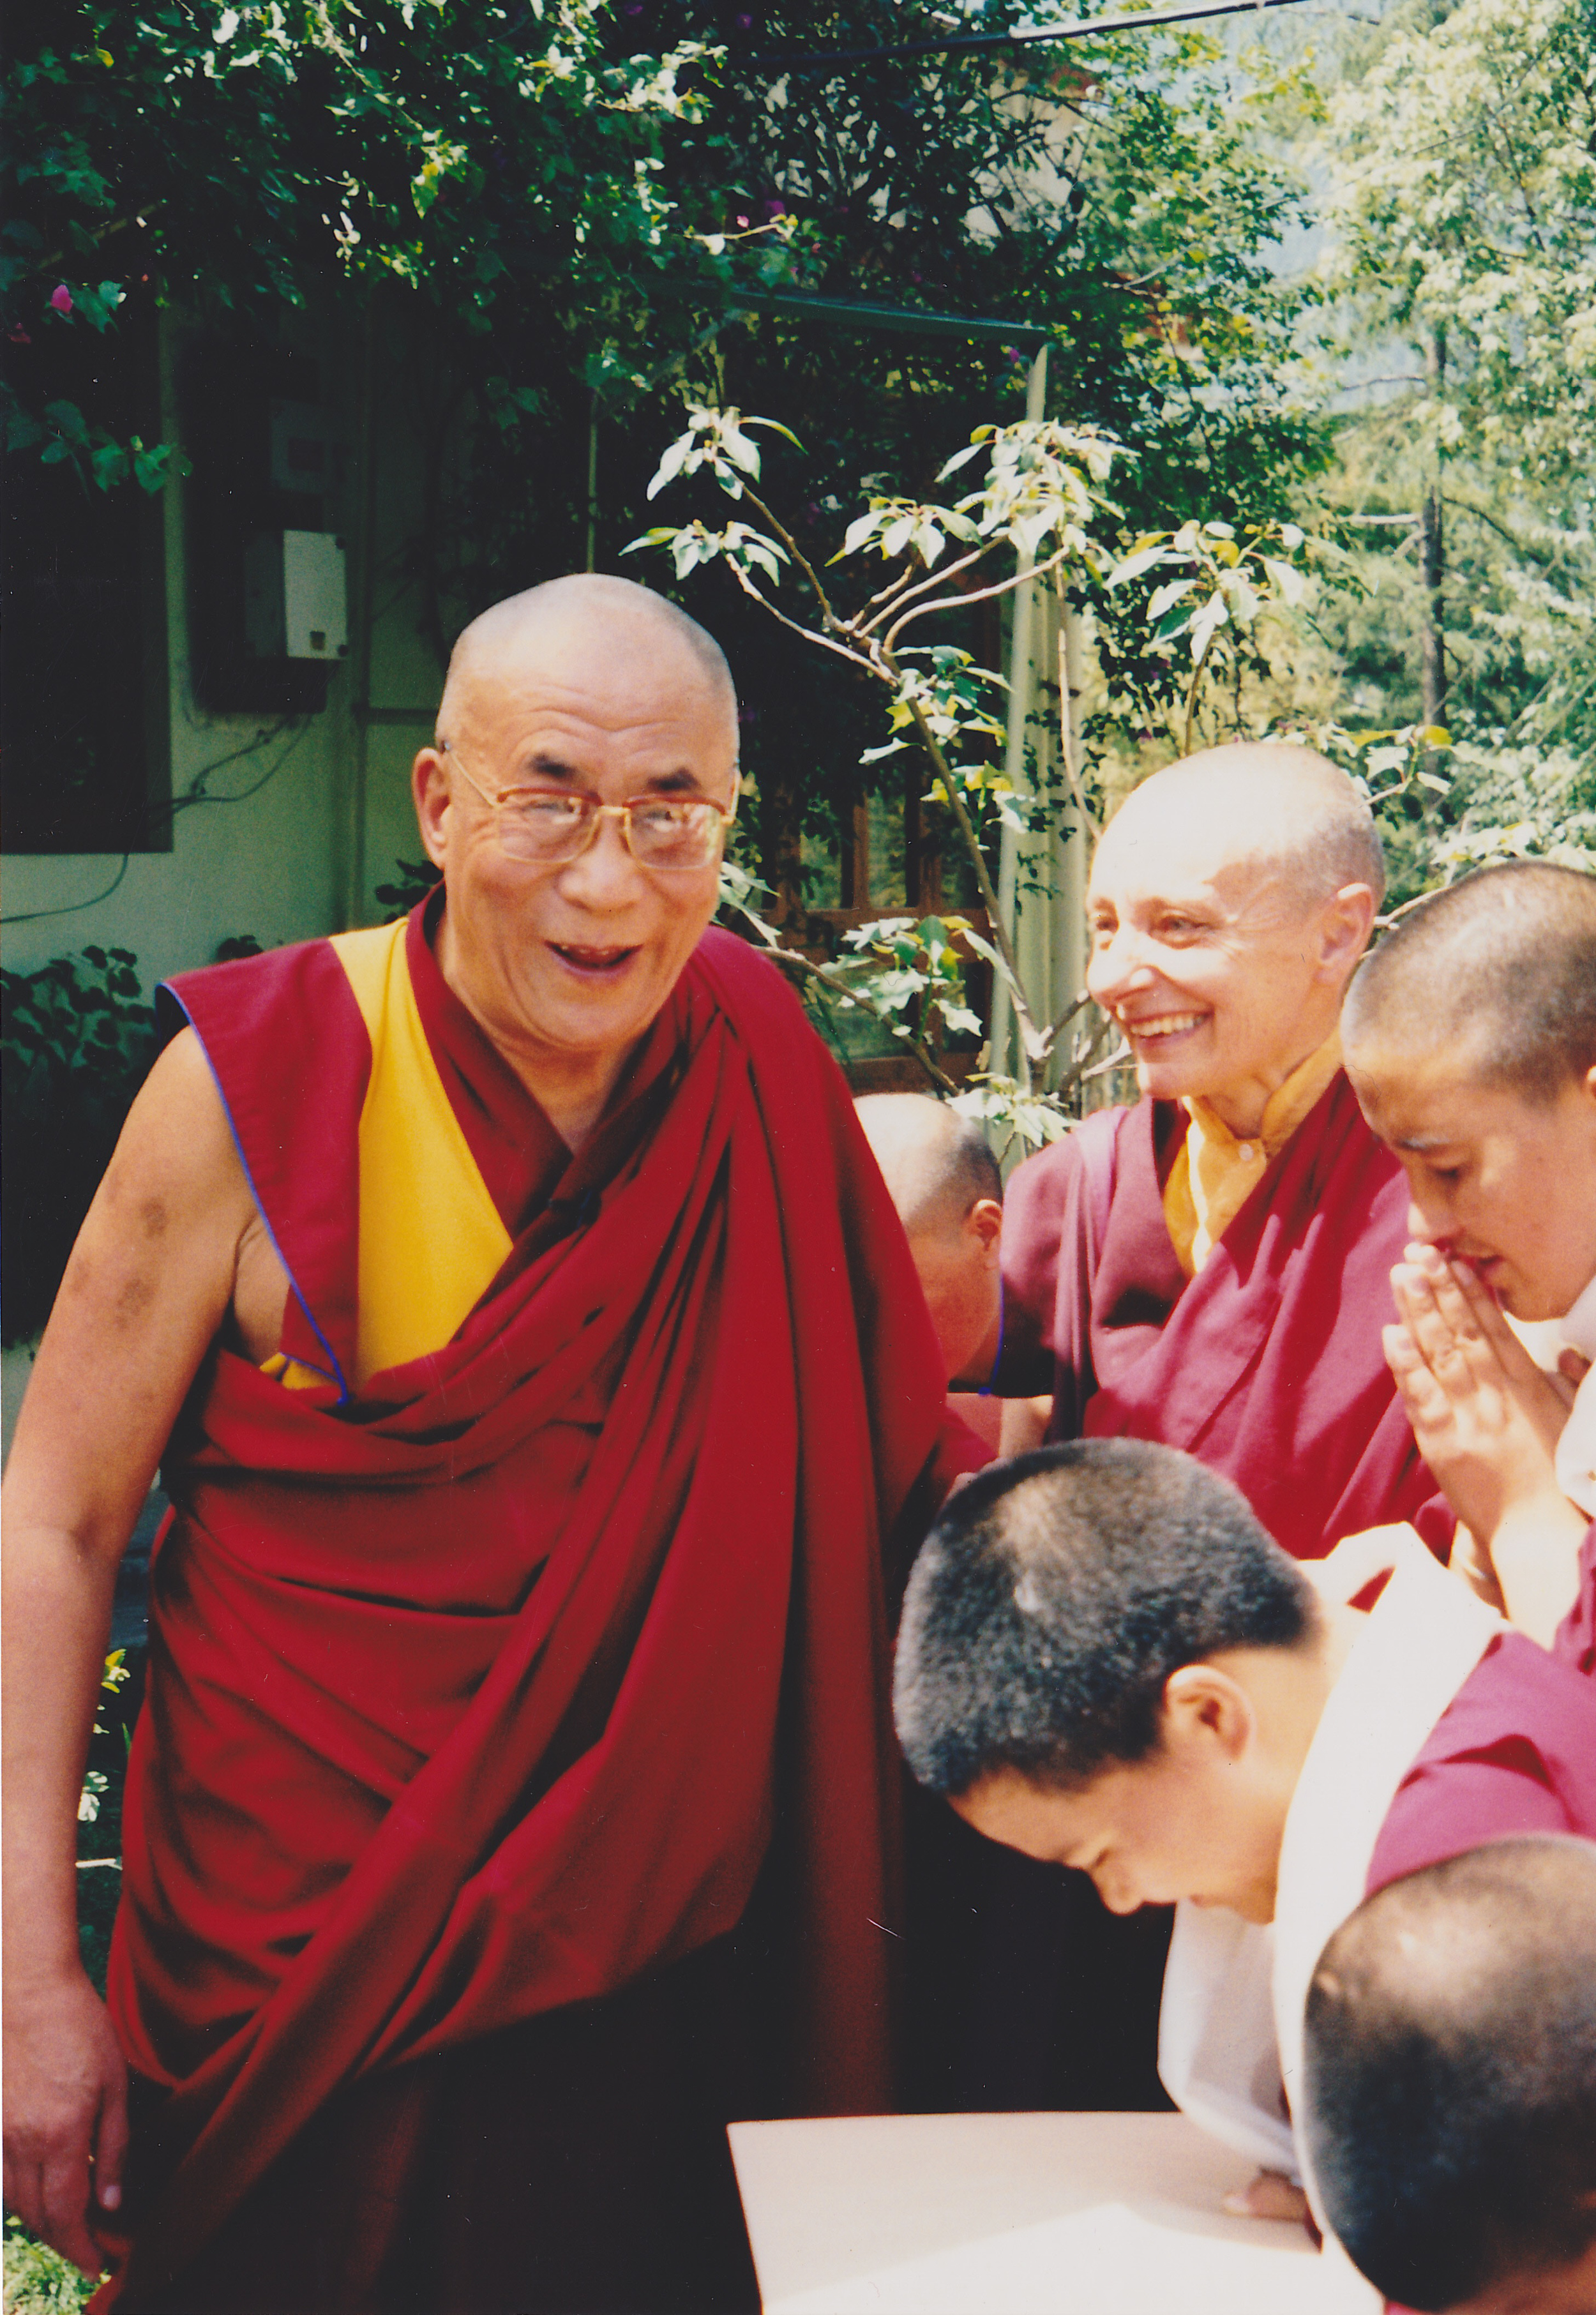 His Holiness the Dalai Lama with Jetsunma and her nuns